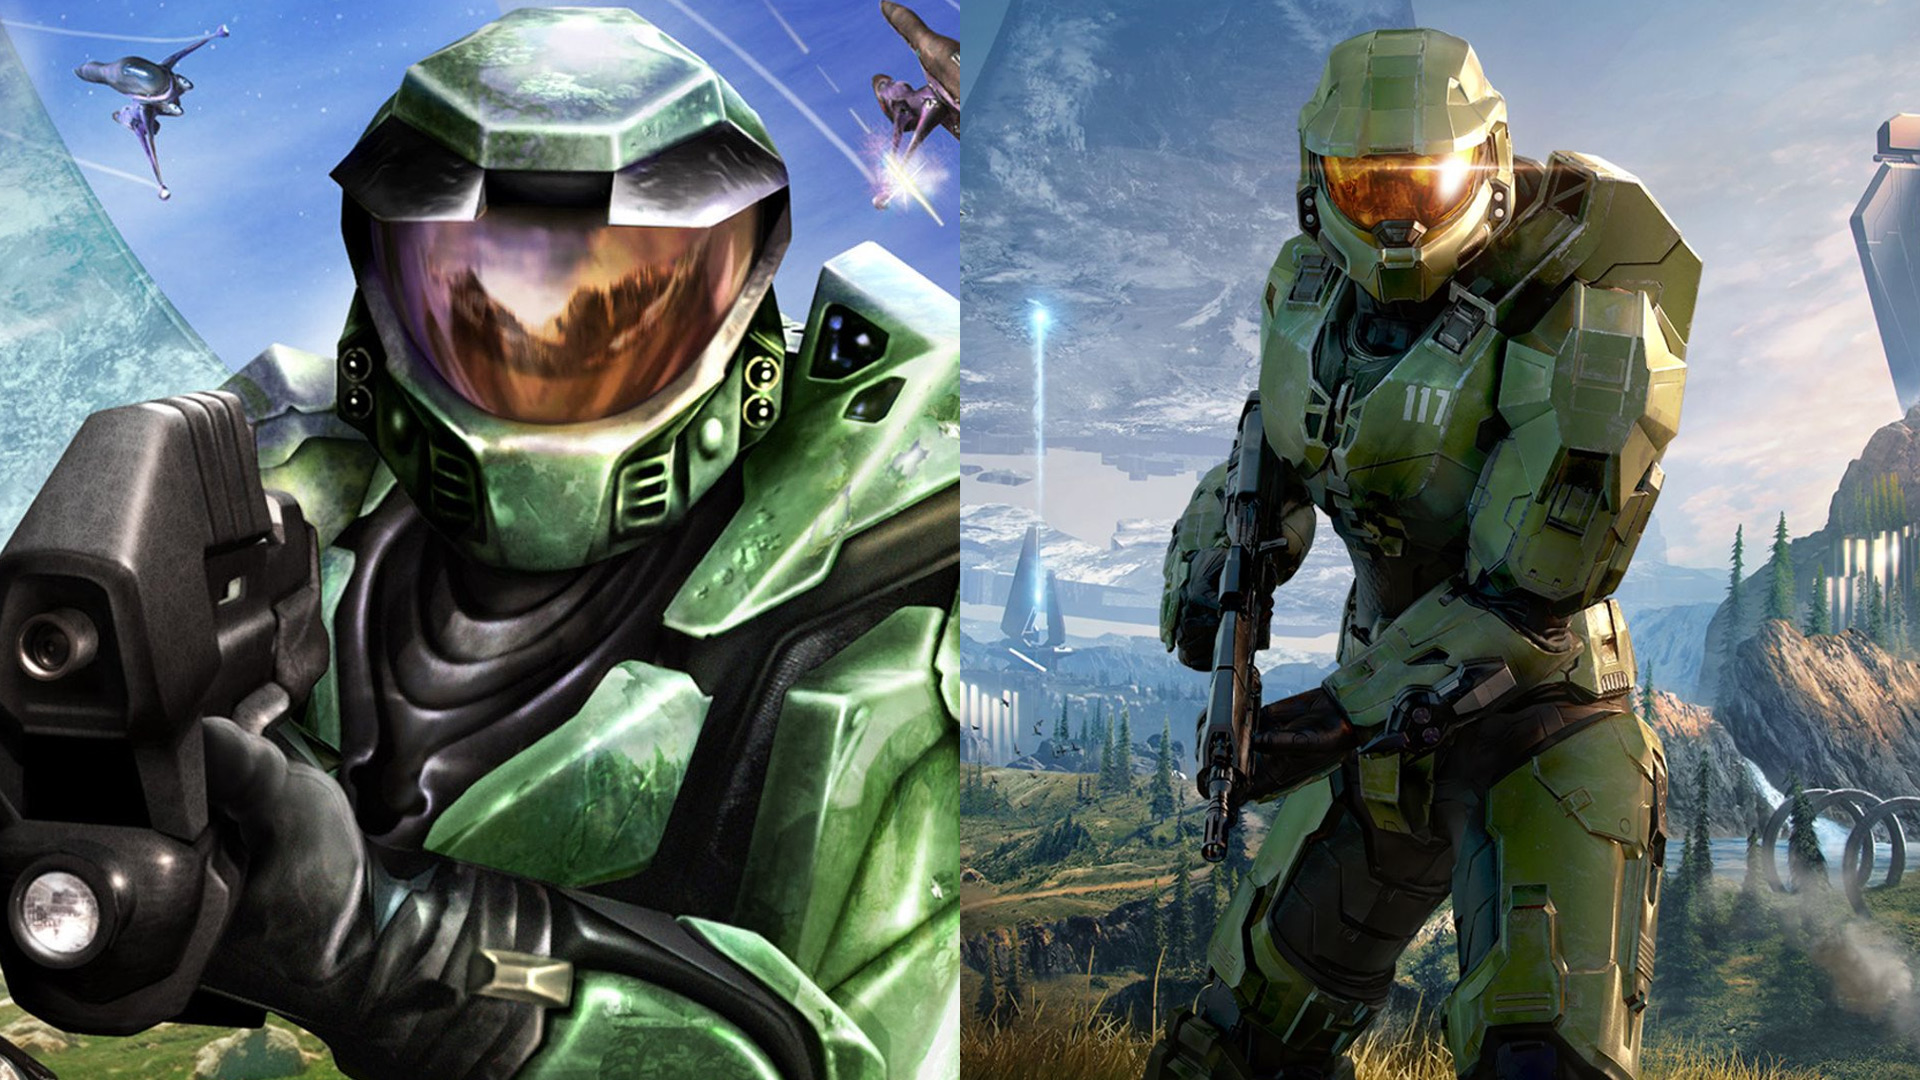 Halo Games In Order The Full Halo Chronology The Loadout